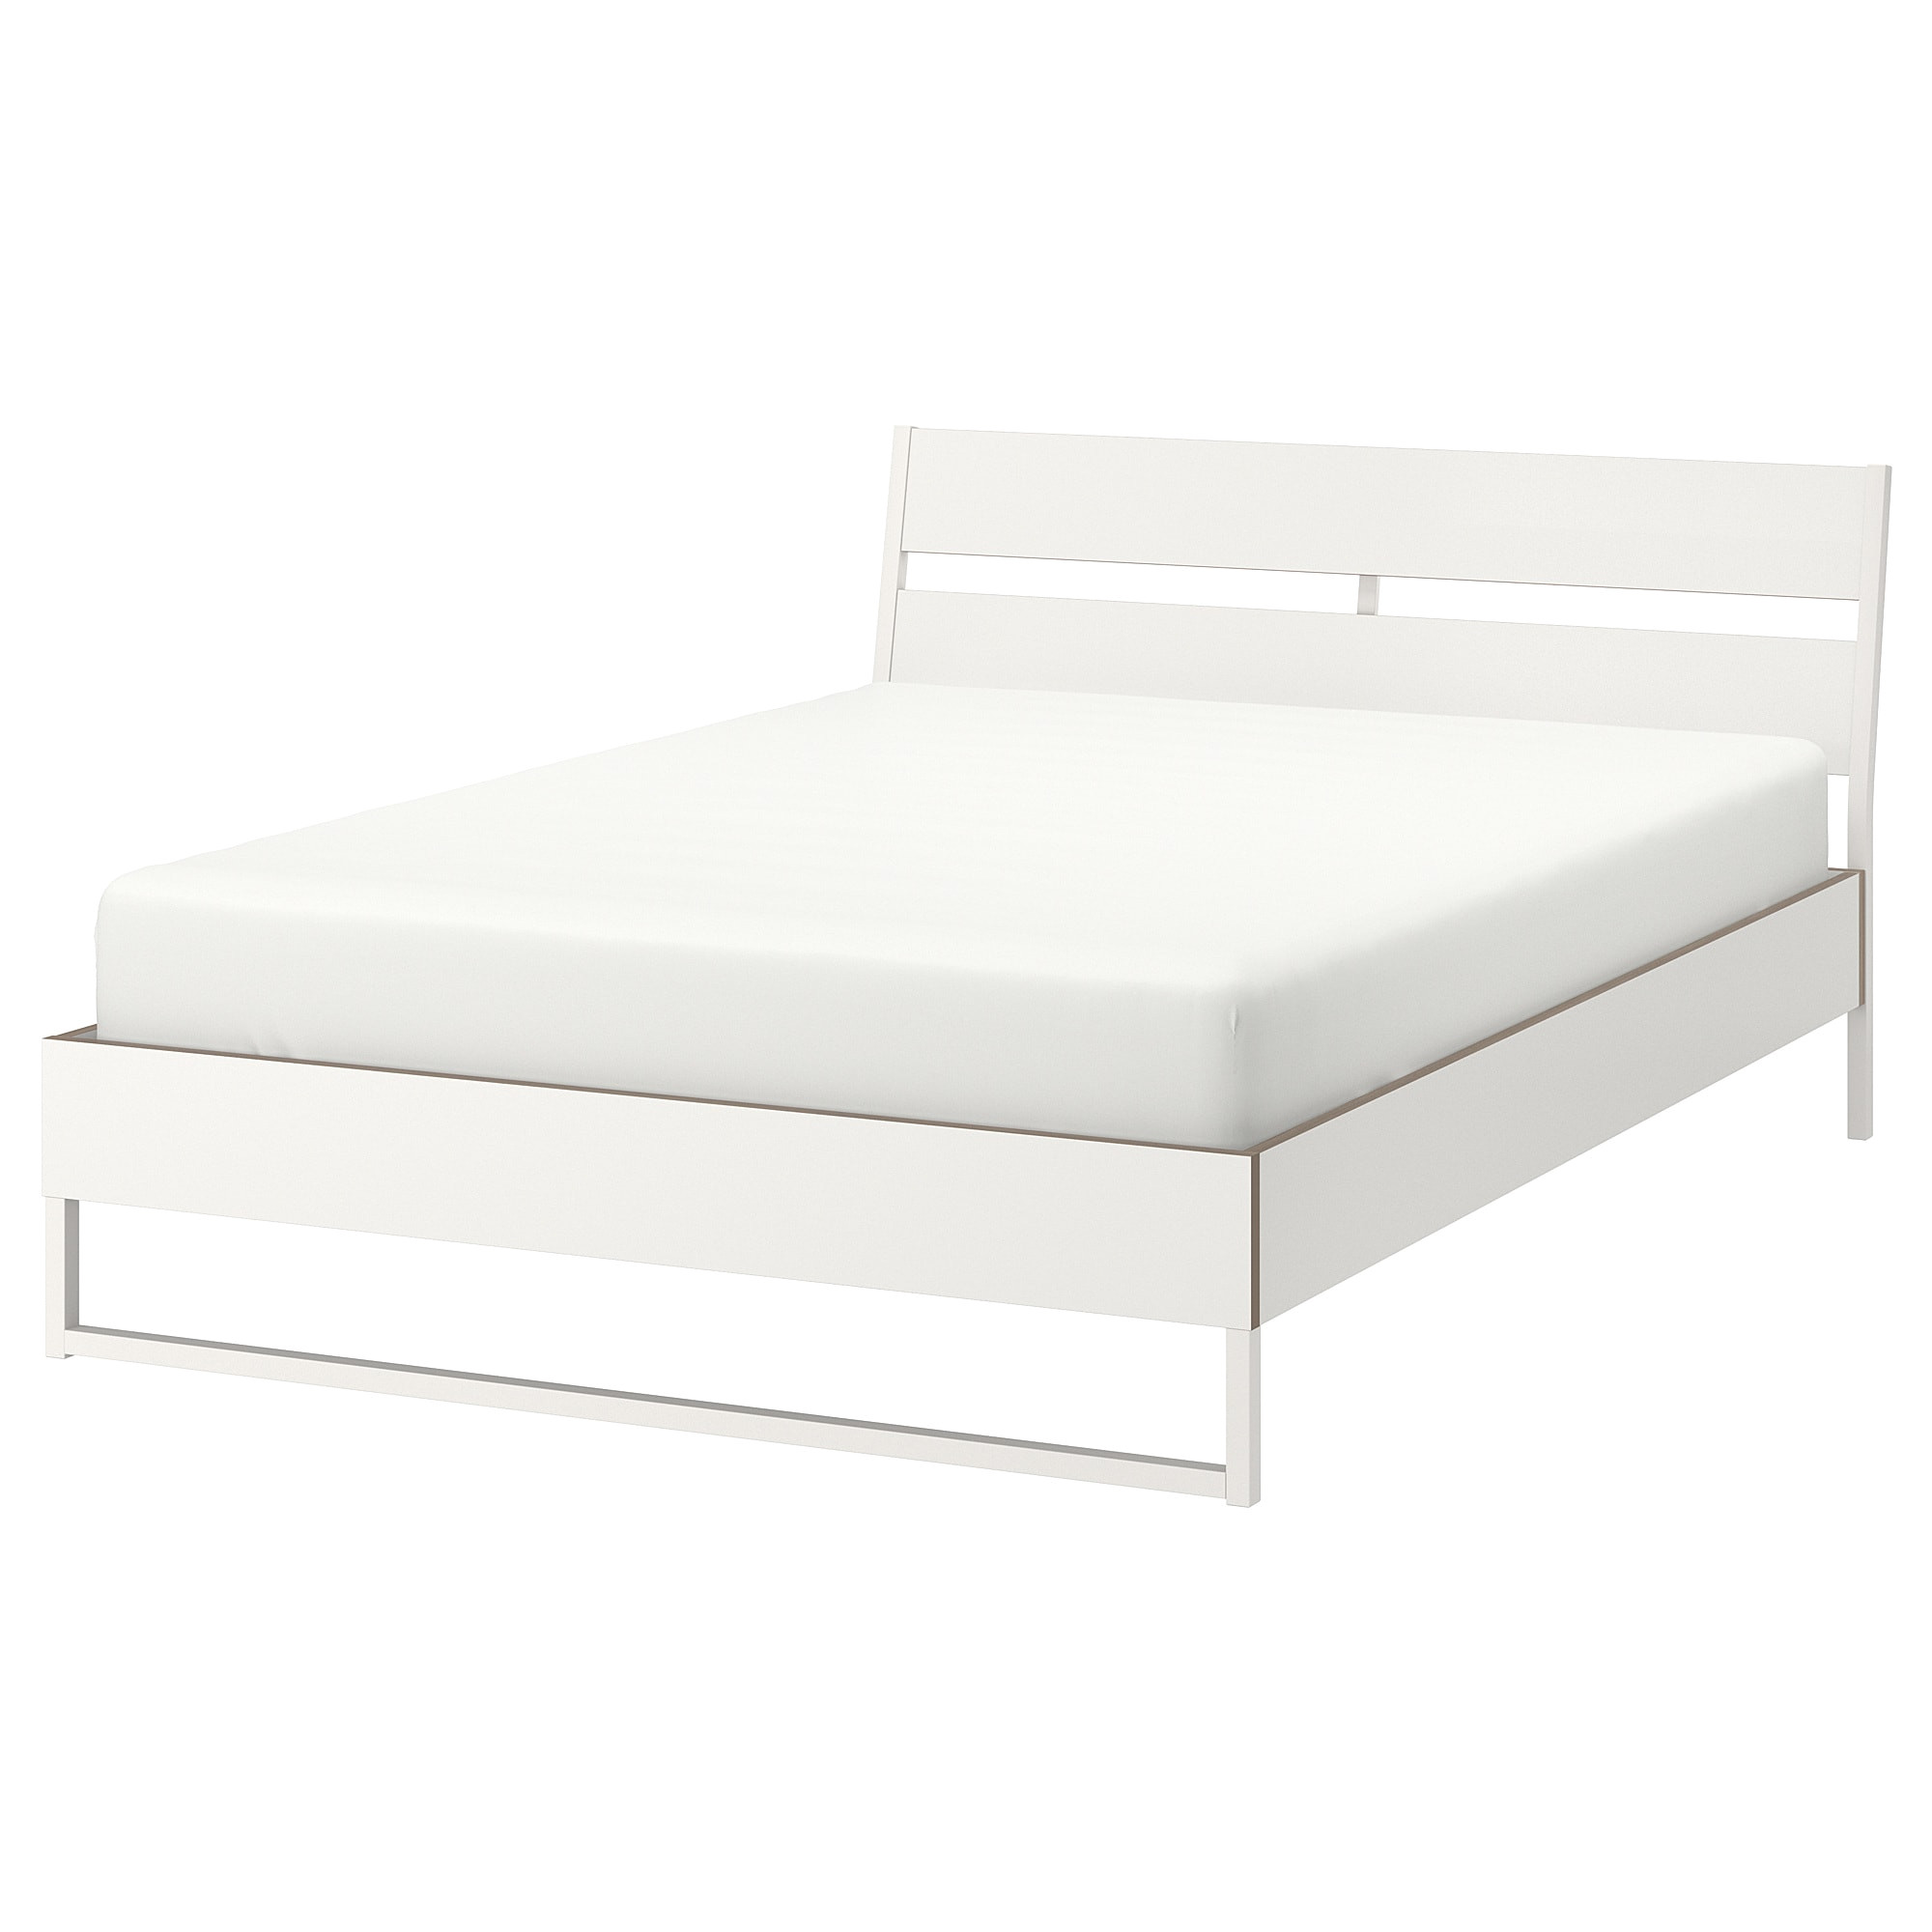 ikea trysil bed frame the angled headboard allows you to sit comfortably when reading in bed